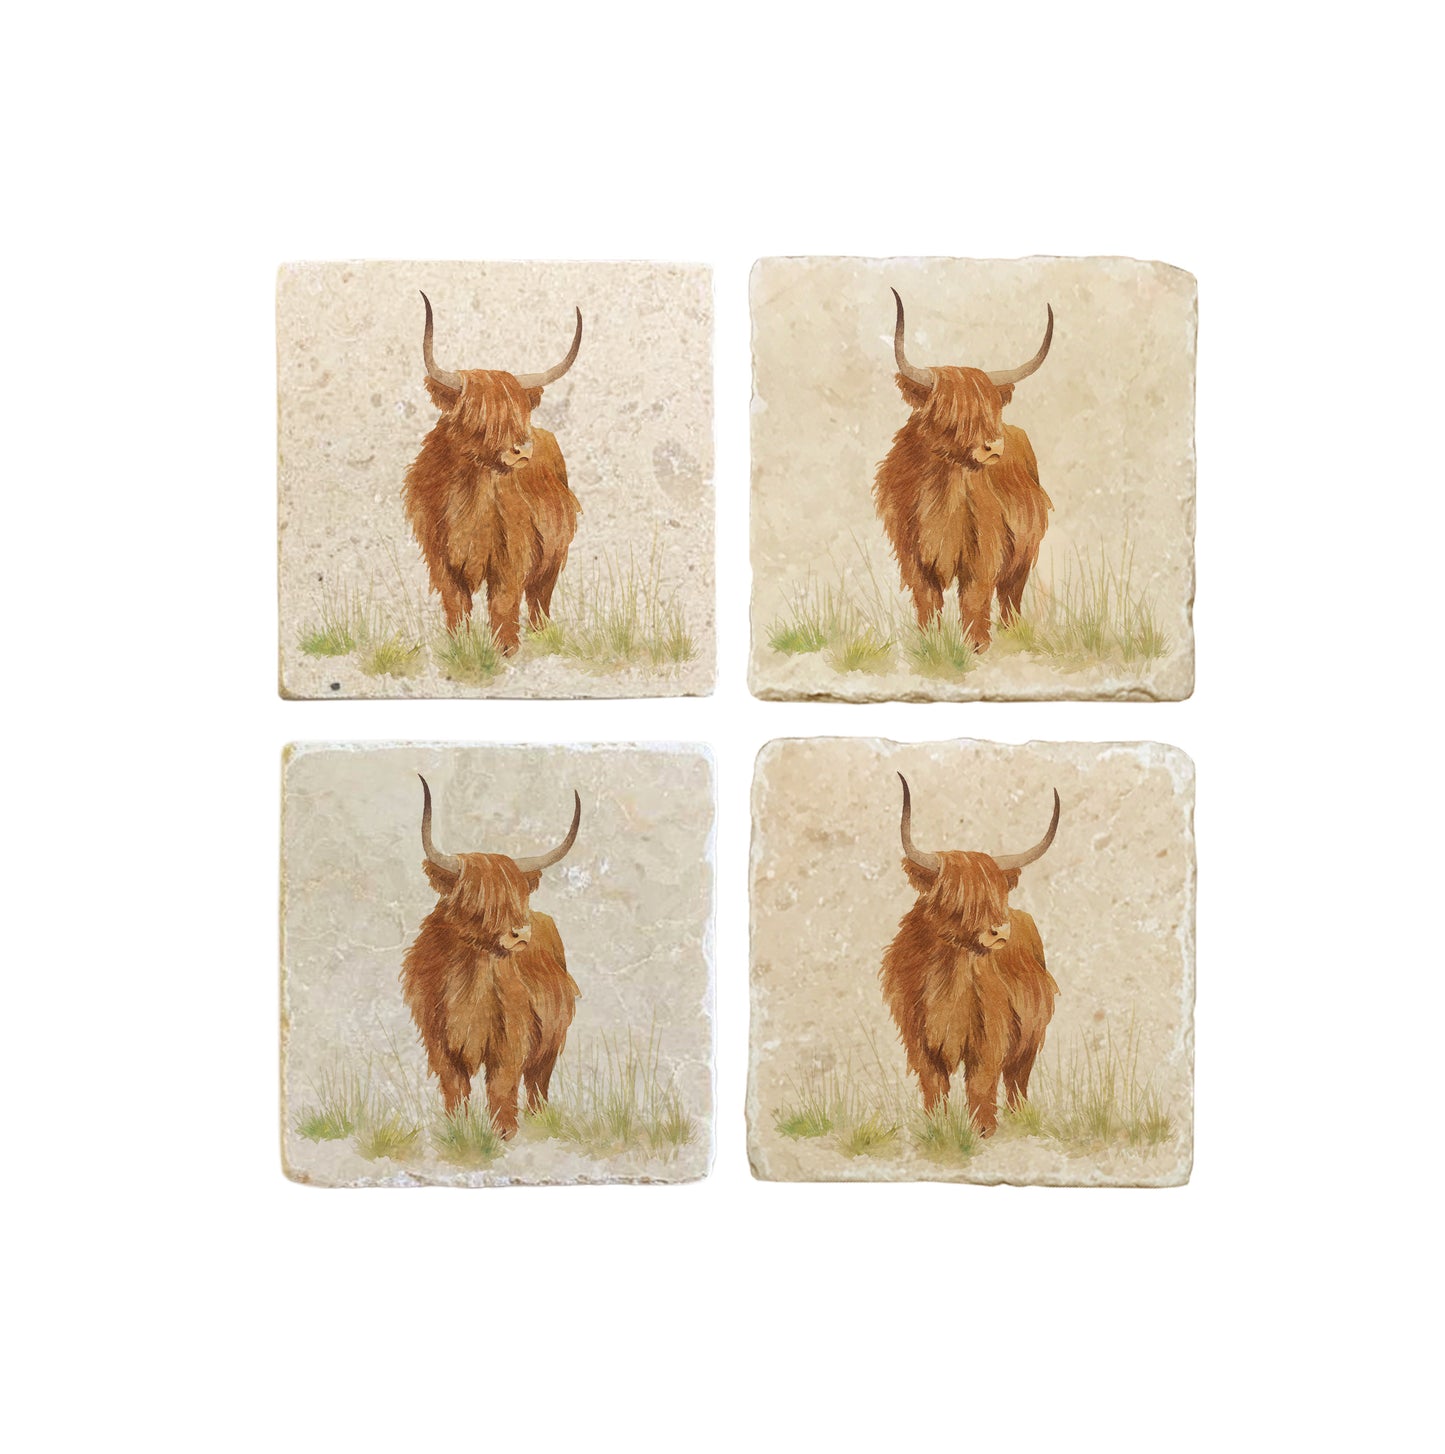 A set of four square marble coasters, featuring a watercolour design of a highland cow standing in a grassy field.